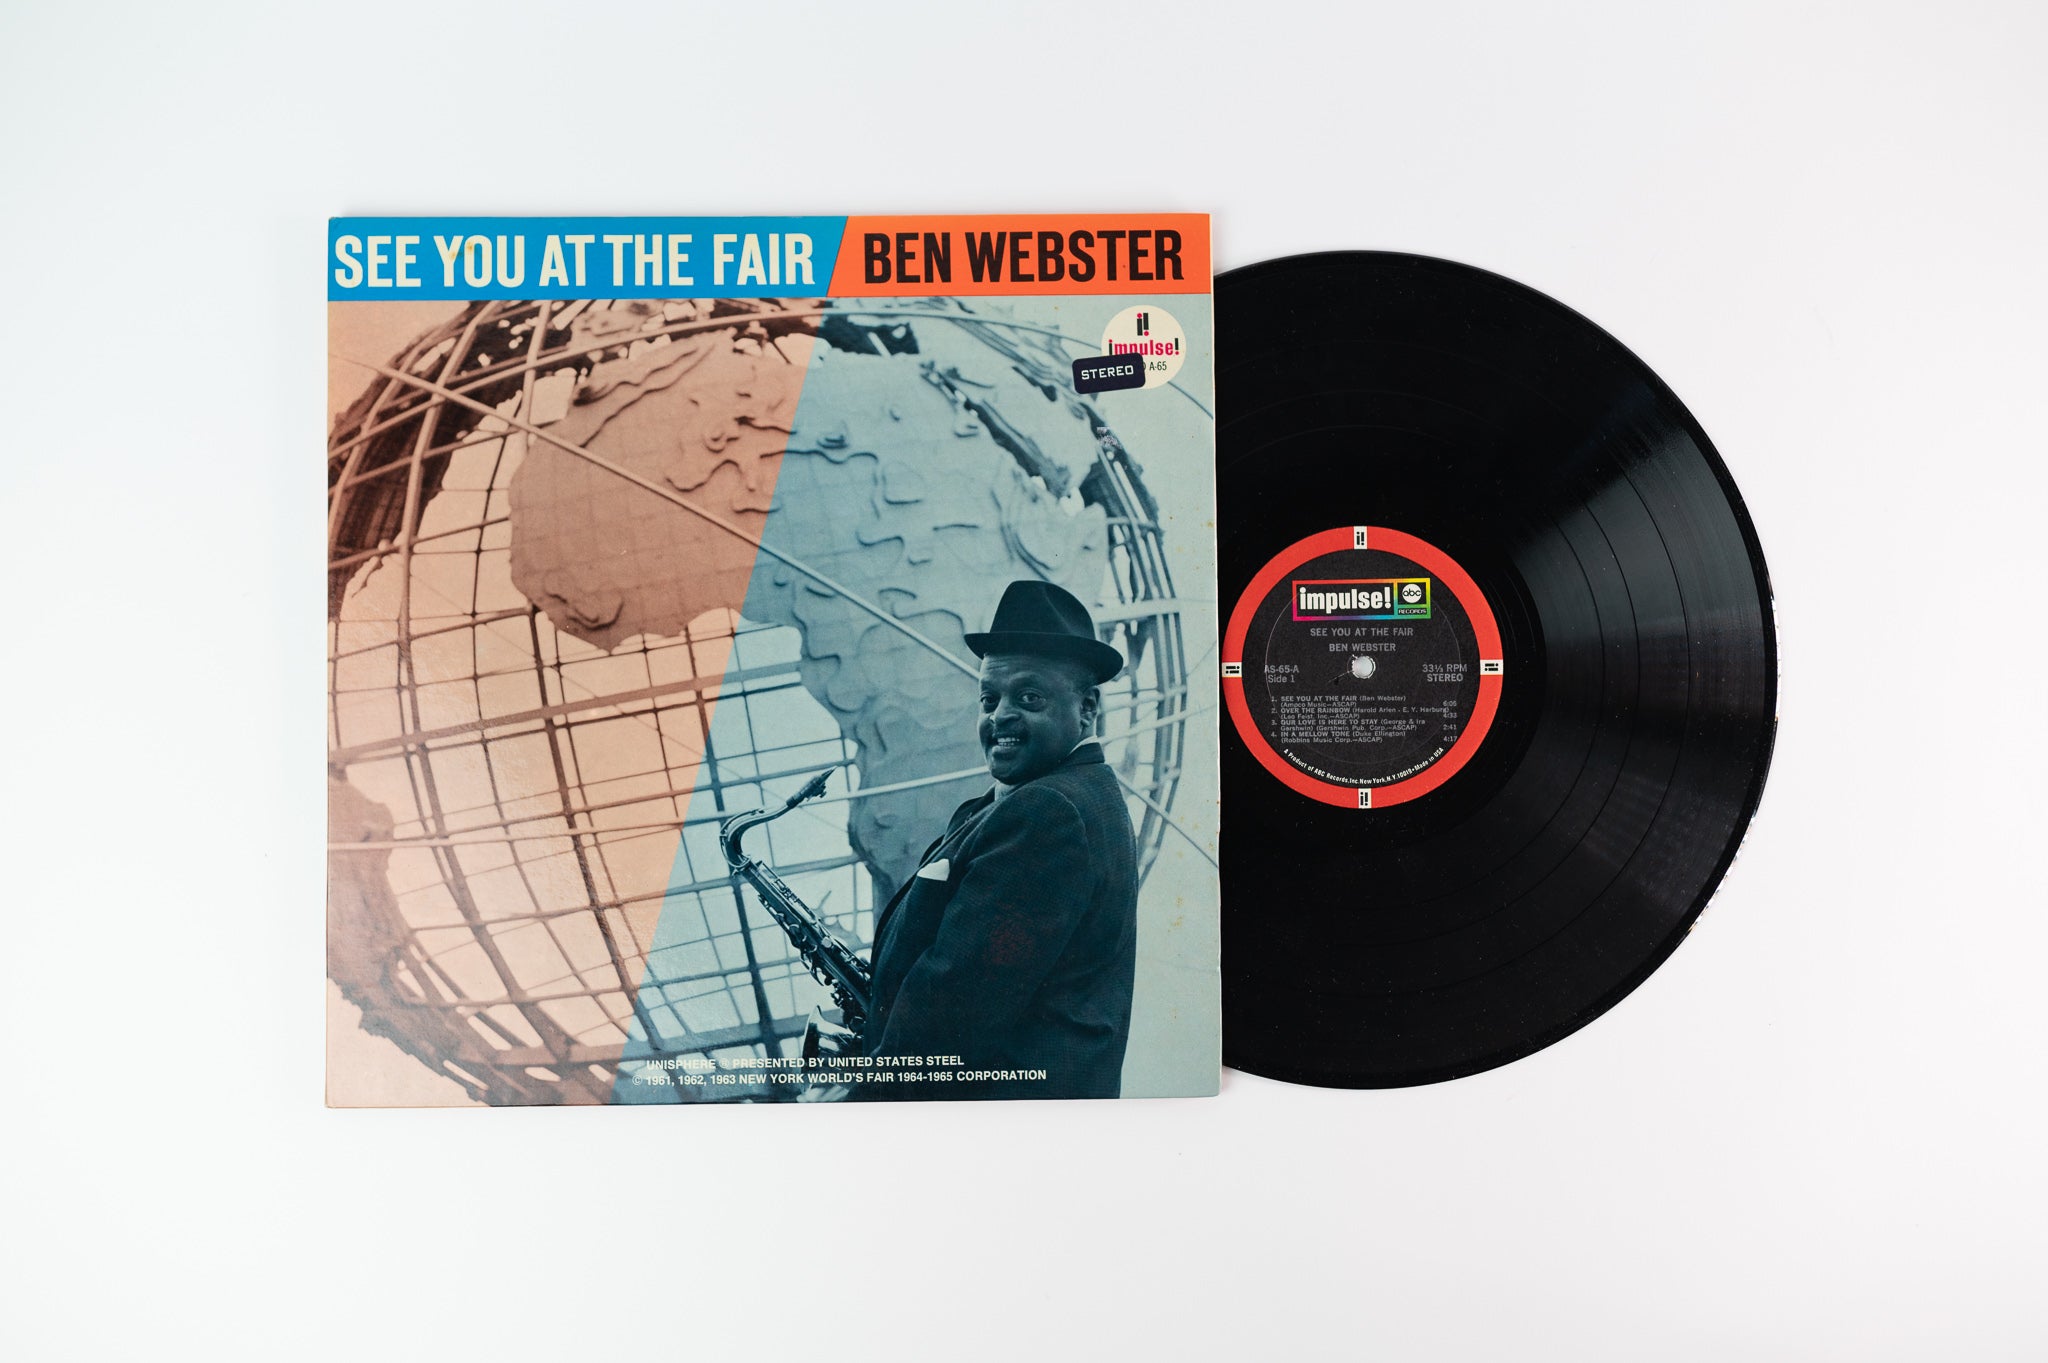 Ben Webster - See You At The Fair on ABC Impulse Stereo